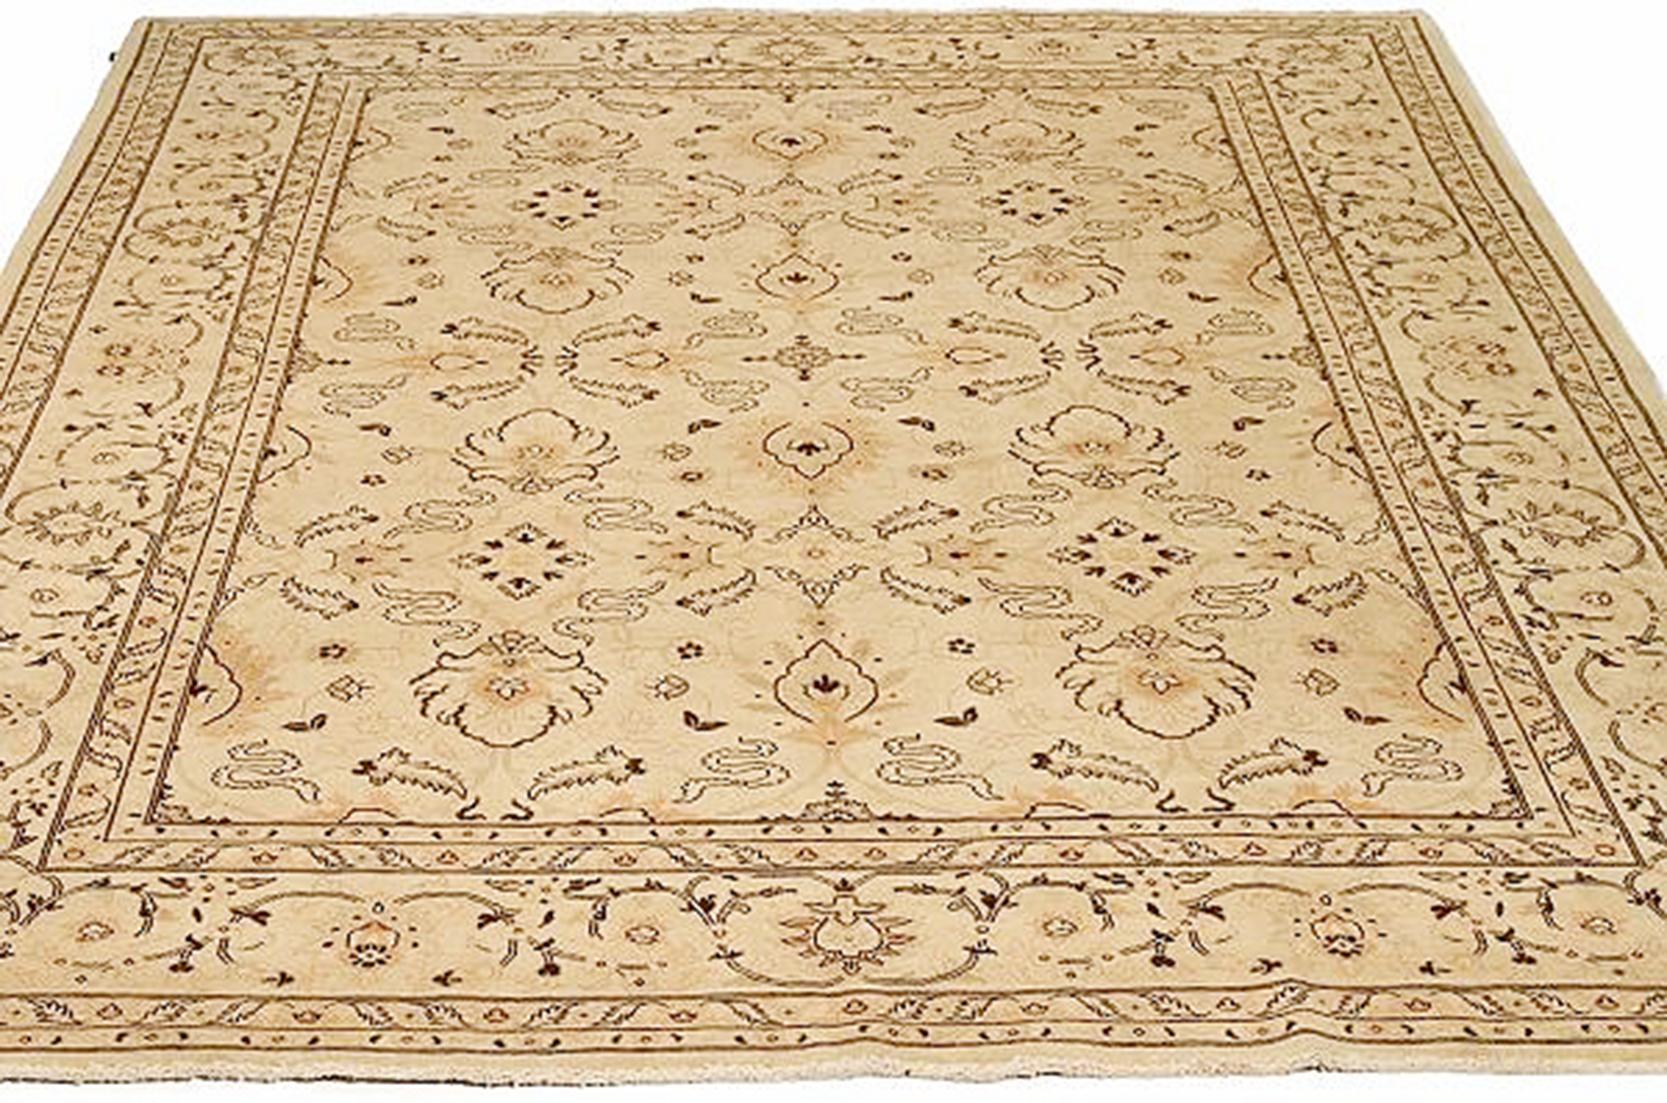 Contemporary Persian Tabriz Rug with Beige & Brown Flower Motifs on Ivory Field In Excellent Condition For Sale In Dallas, TX